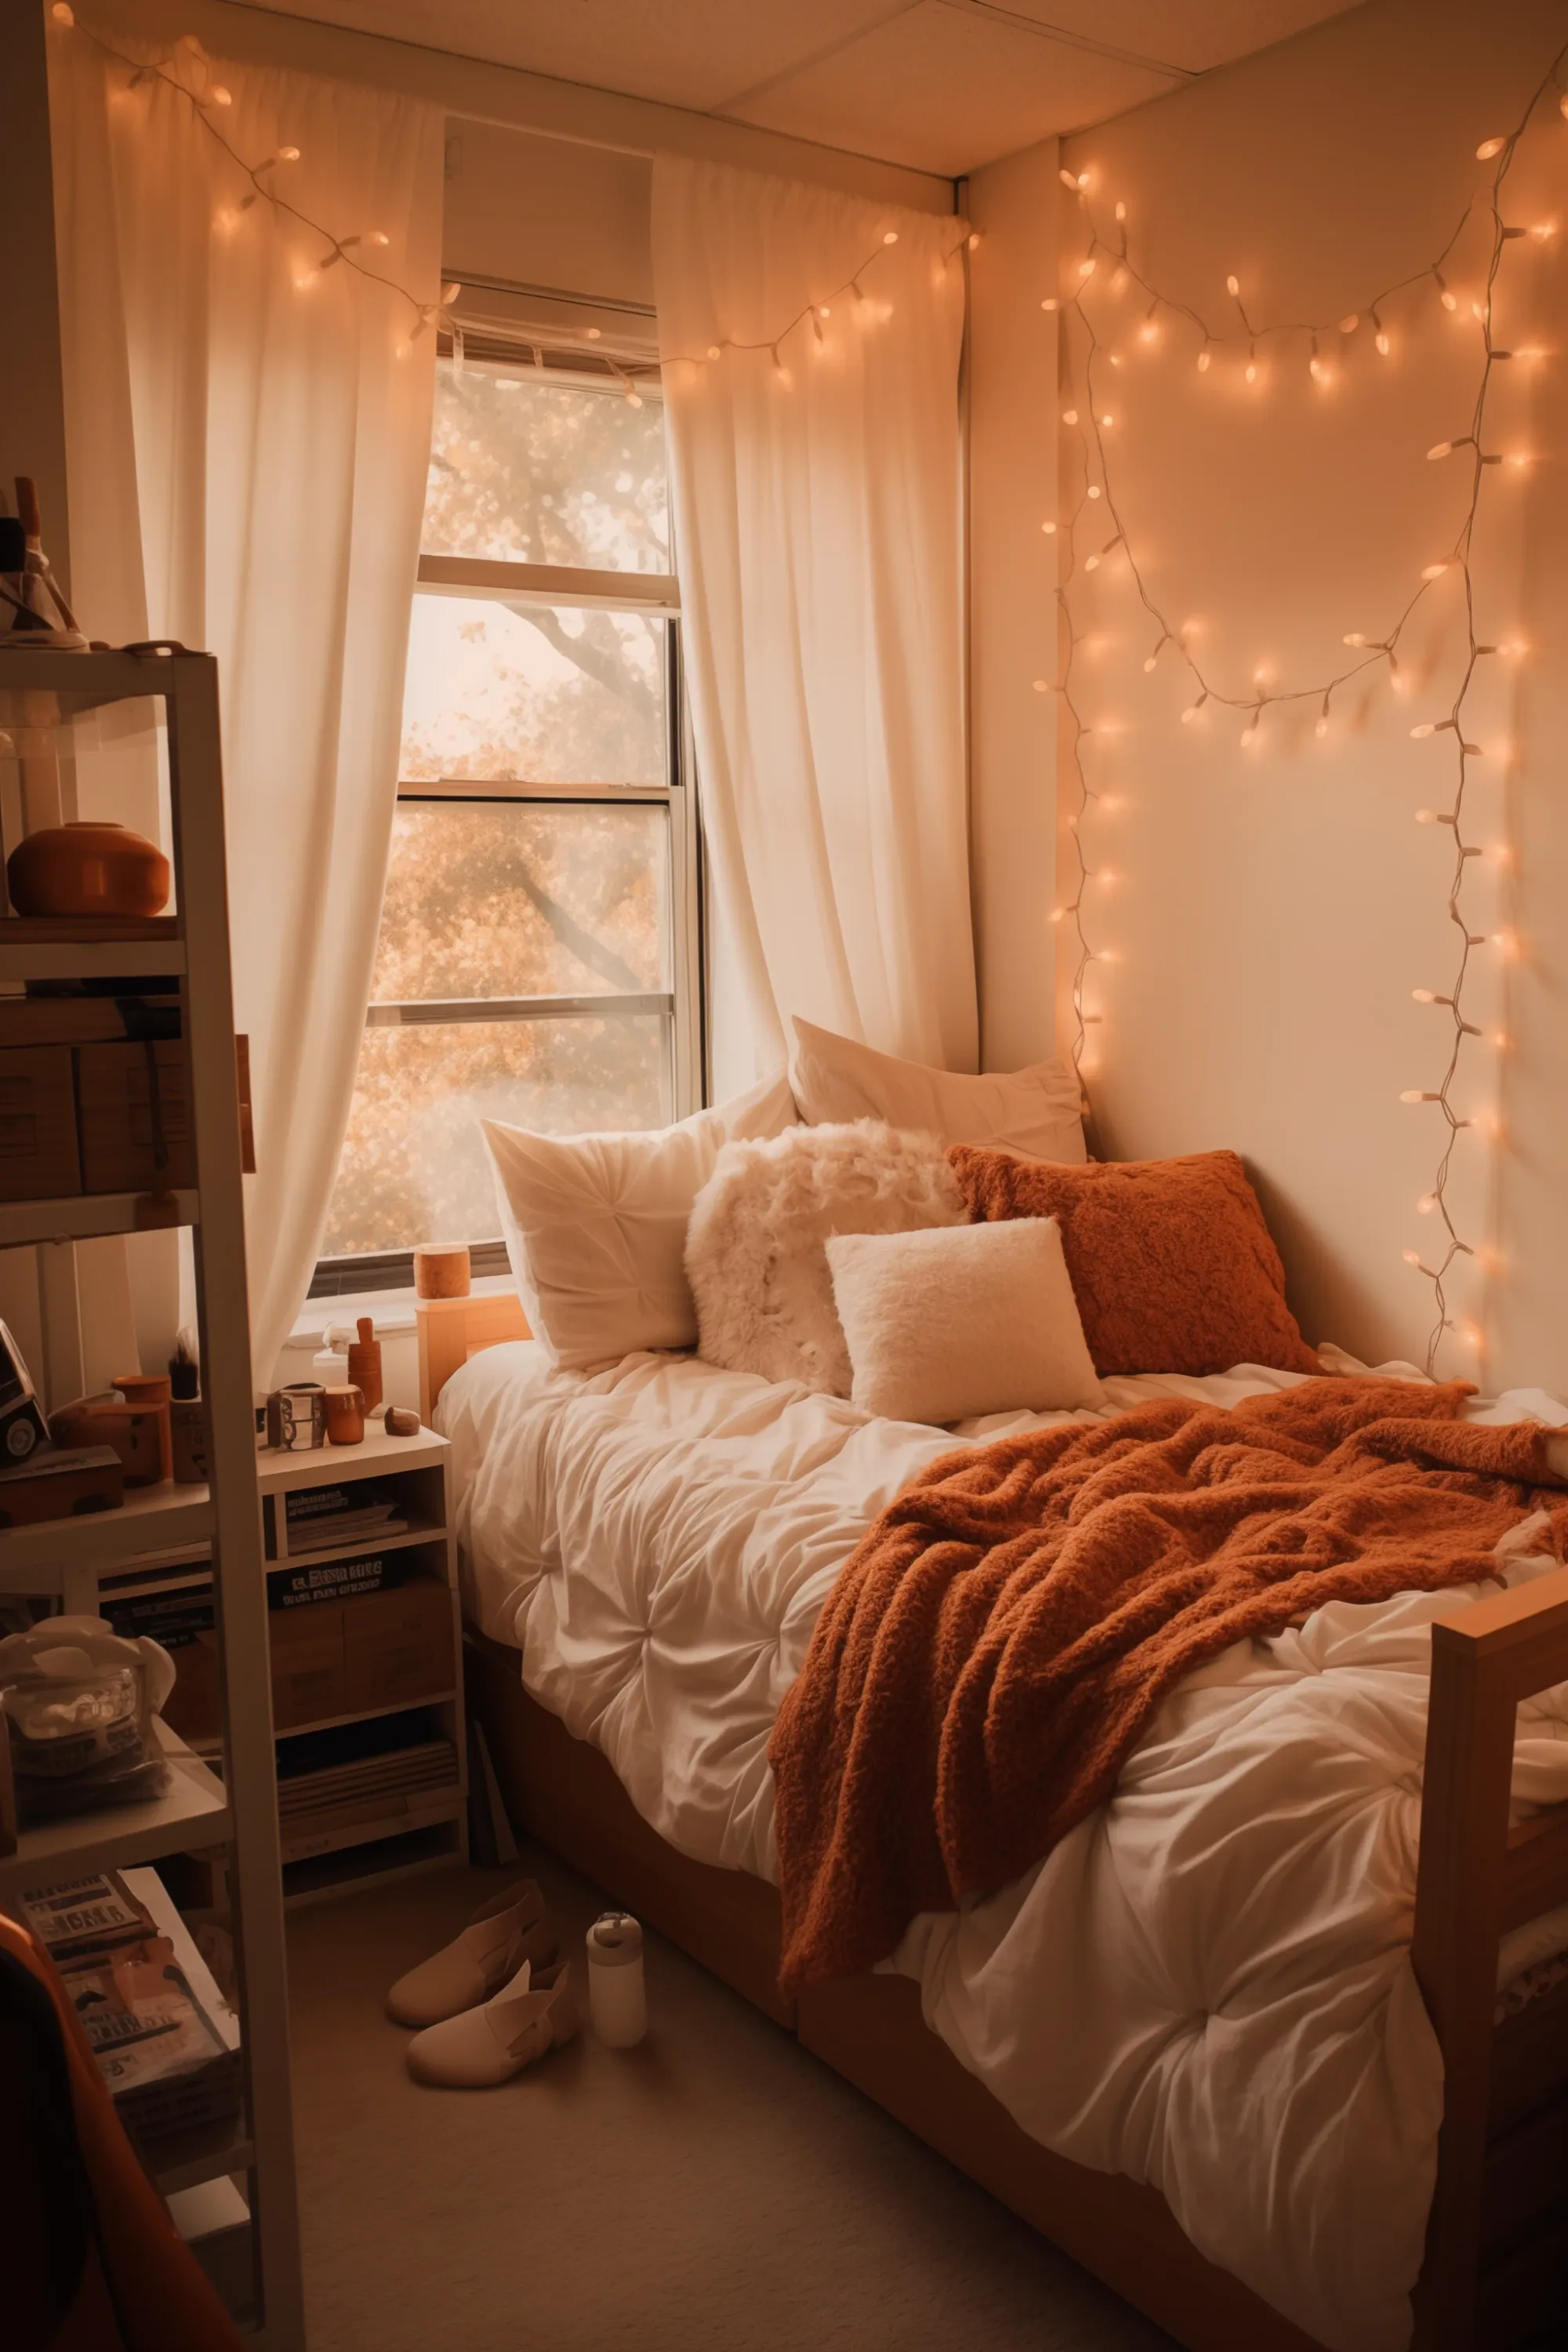 Fairy lights draped around a room with natural materials